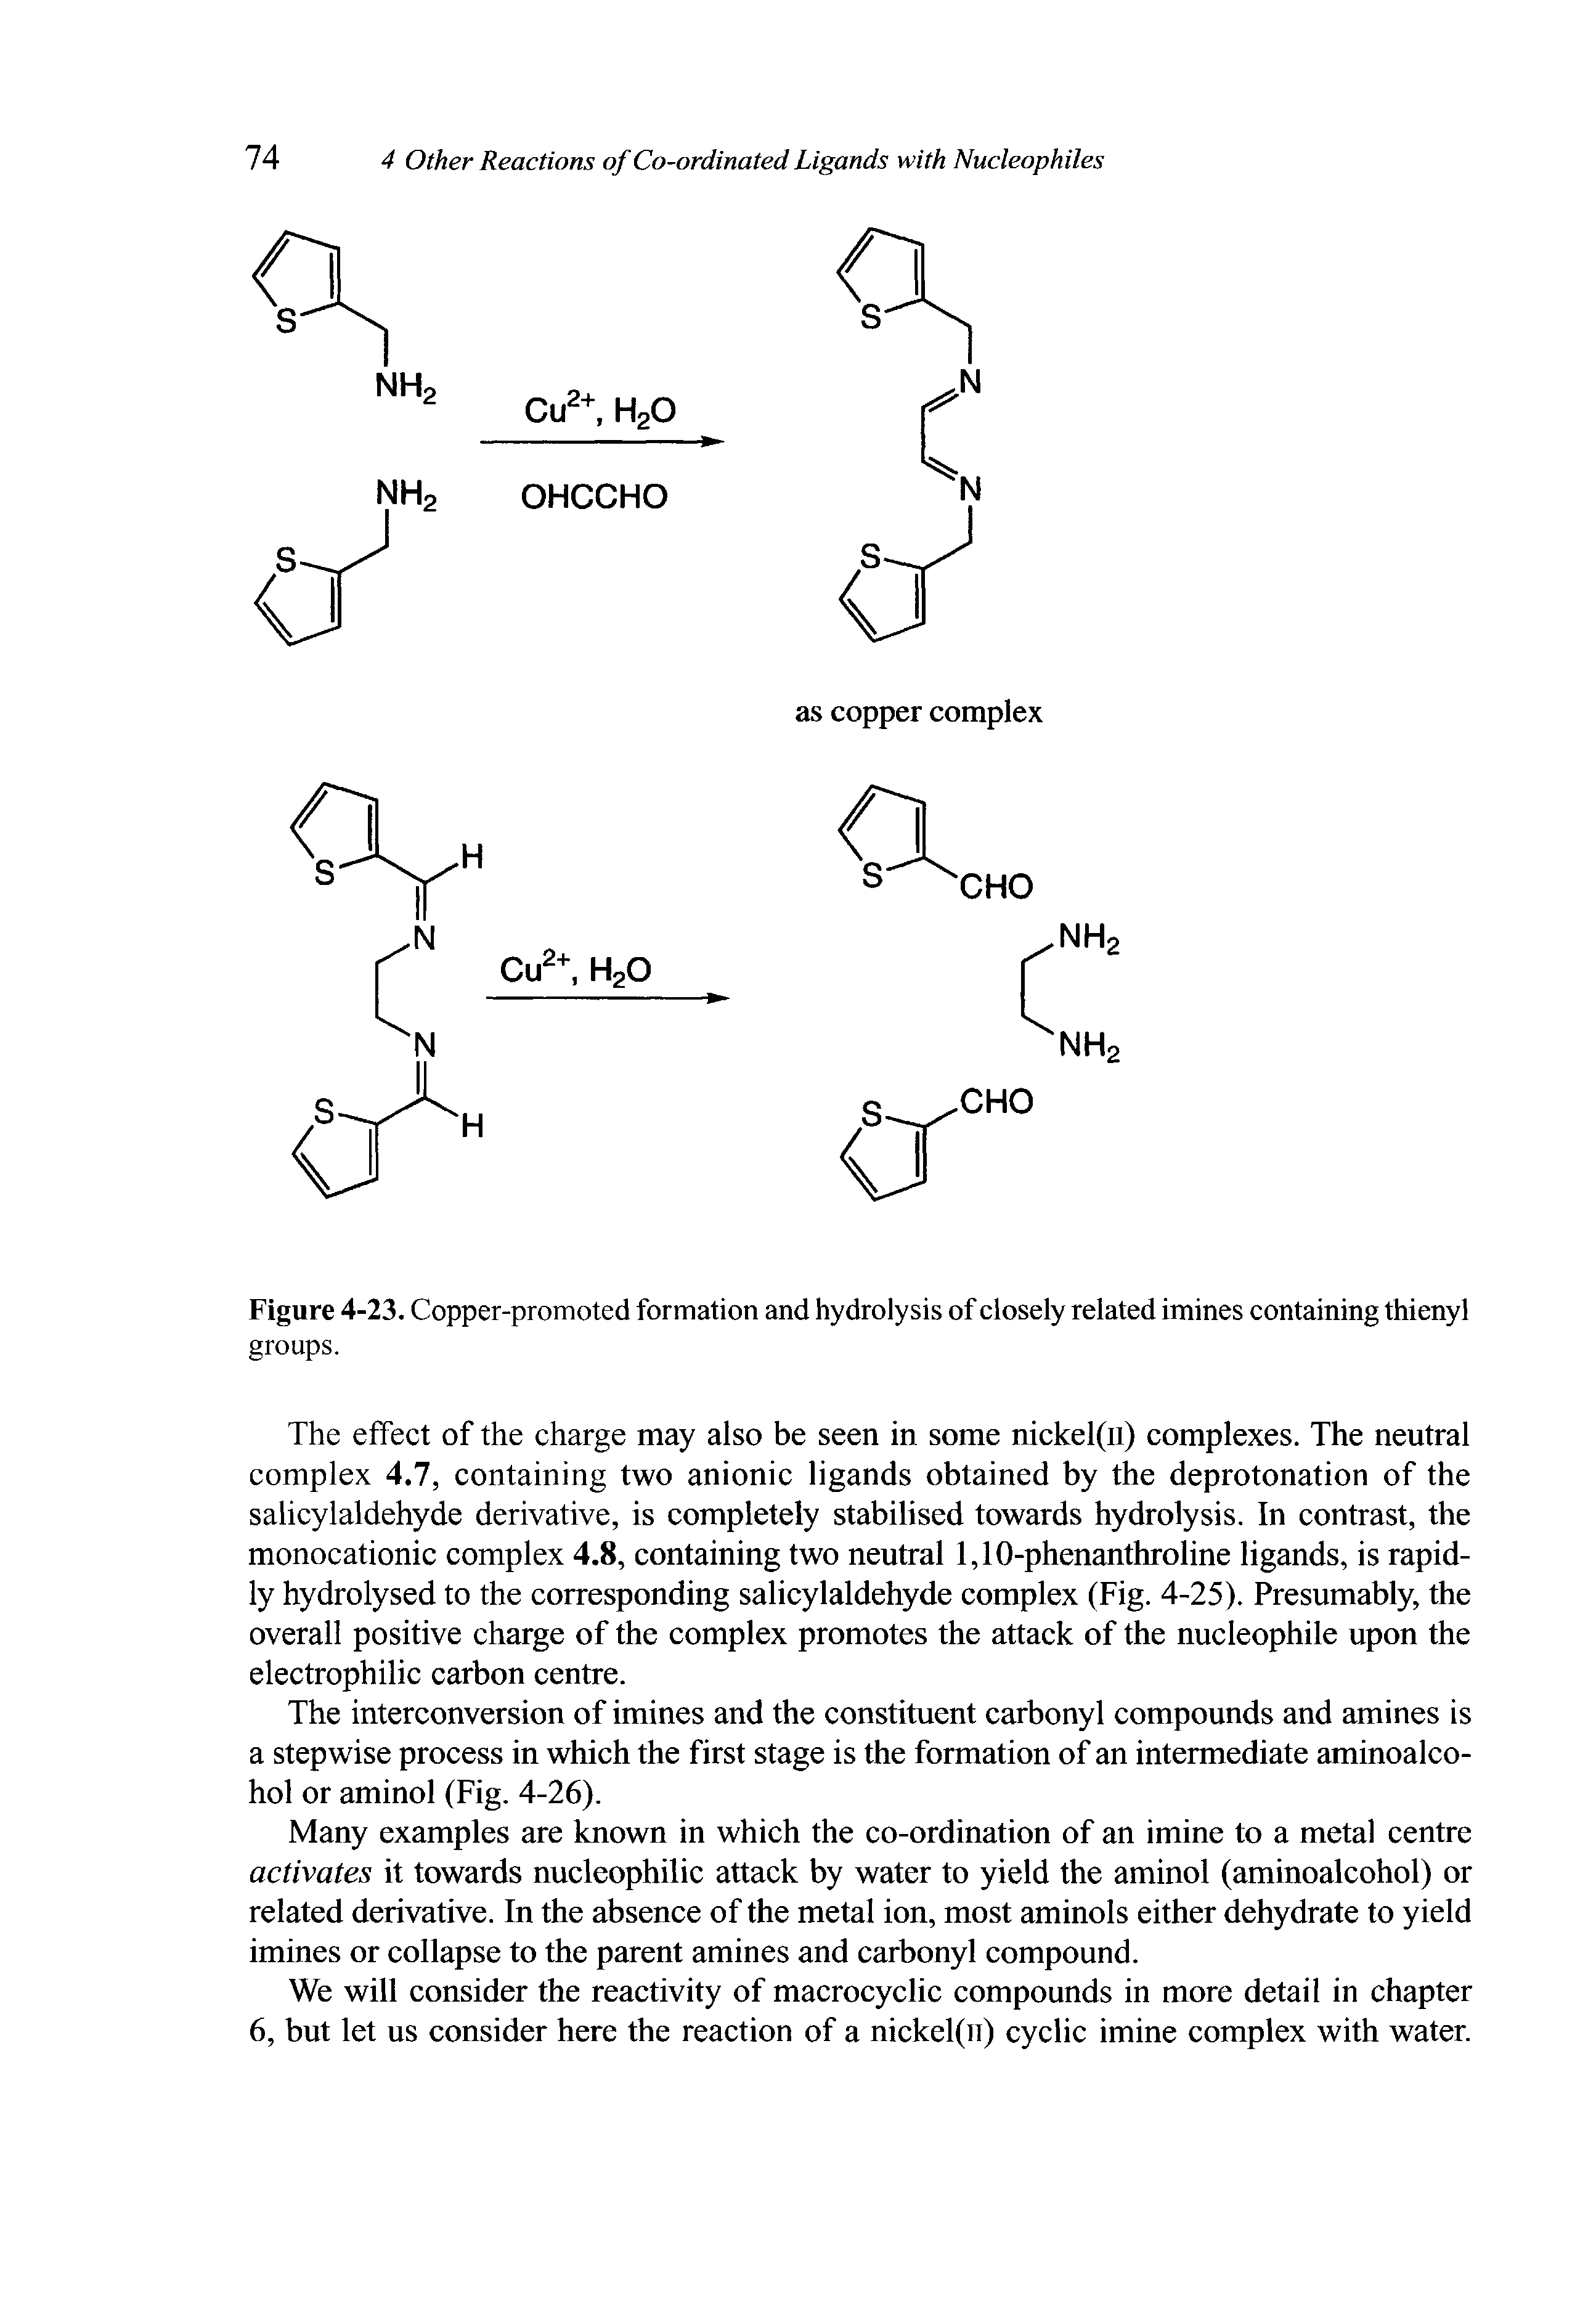 Figure 4-23. Copper-promoted formation and hydrolysis of closely related imines containing thienyl groups.